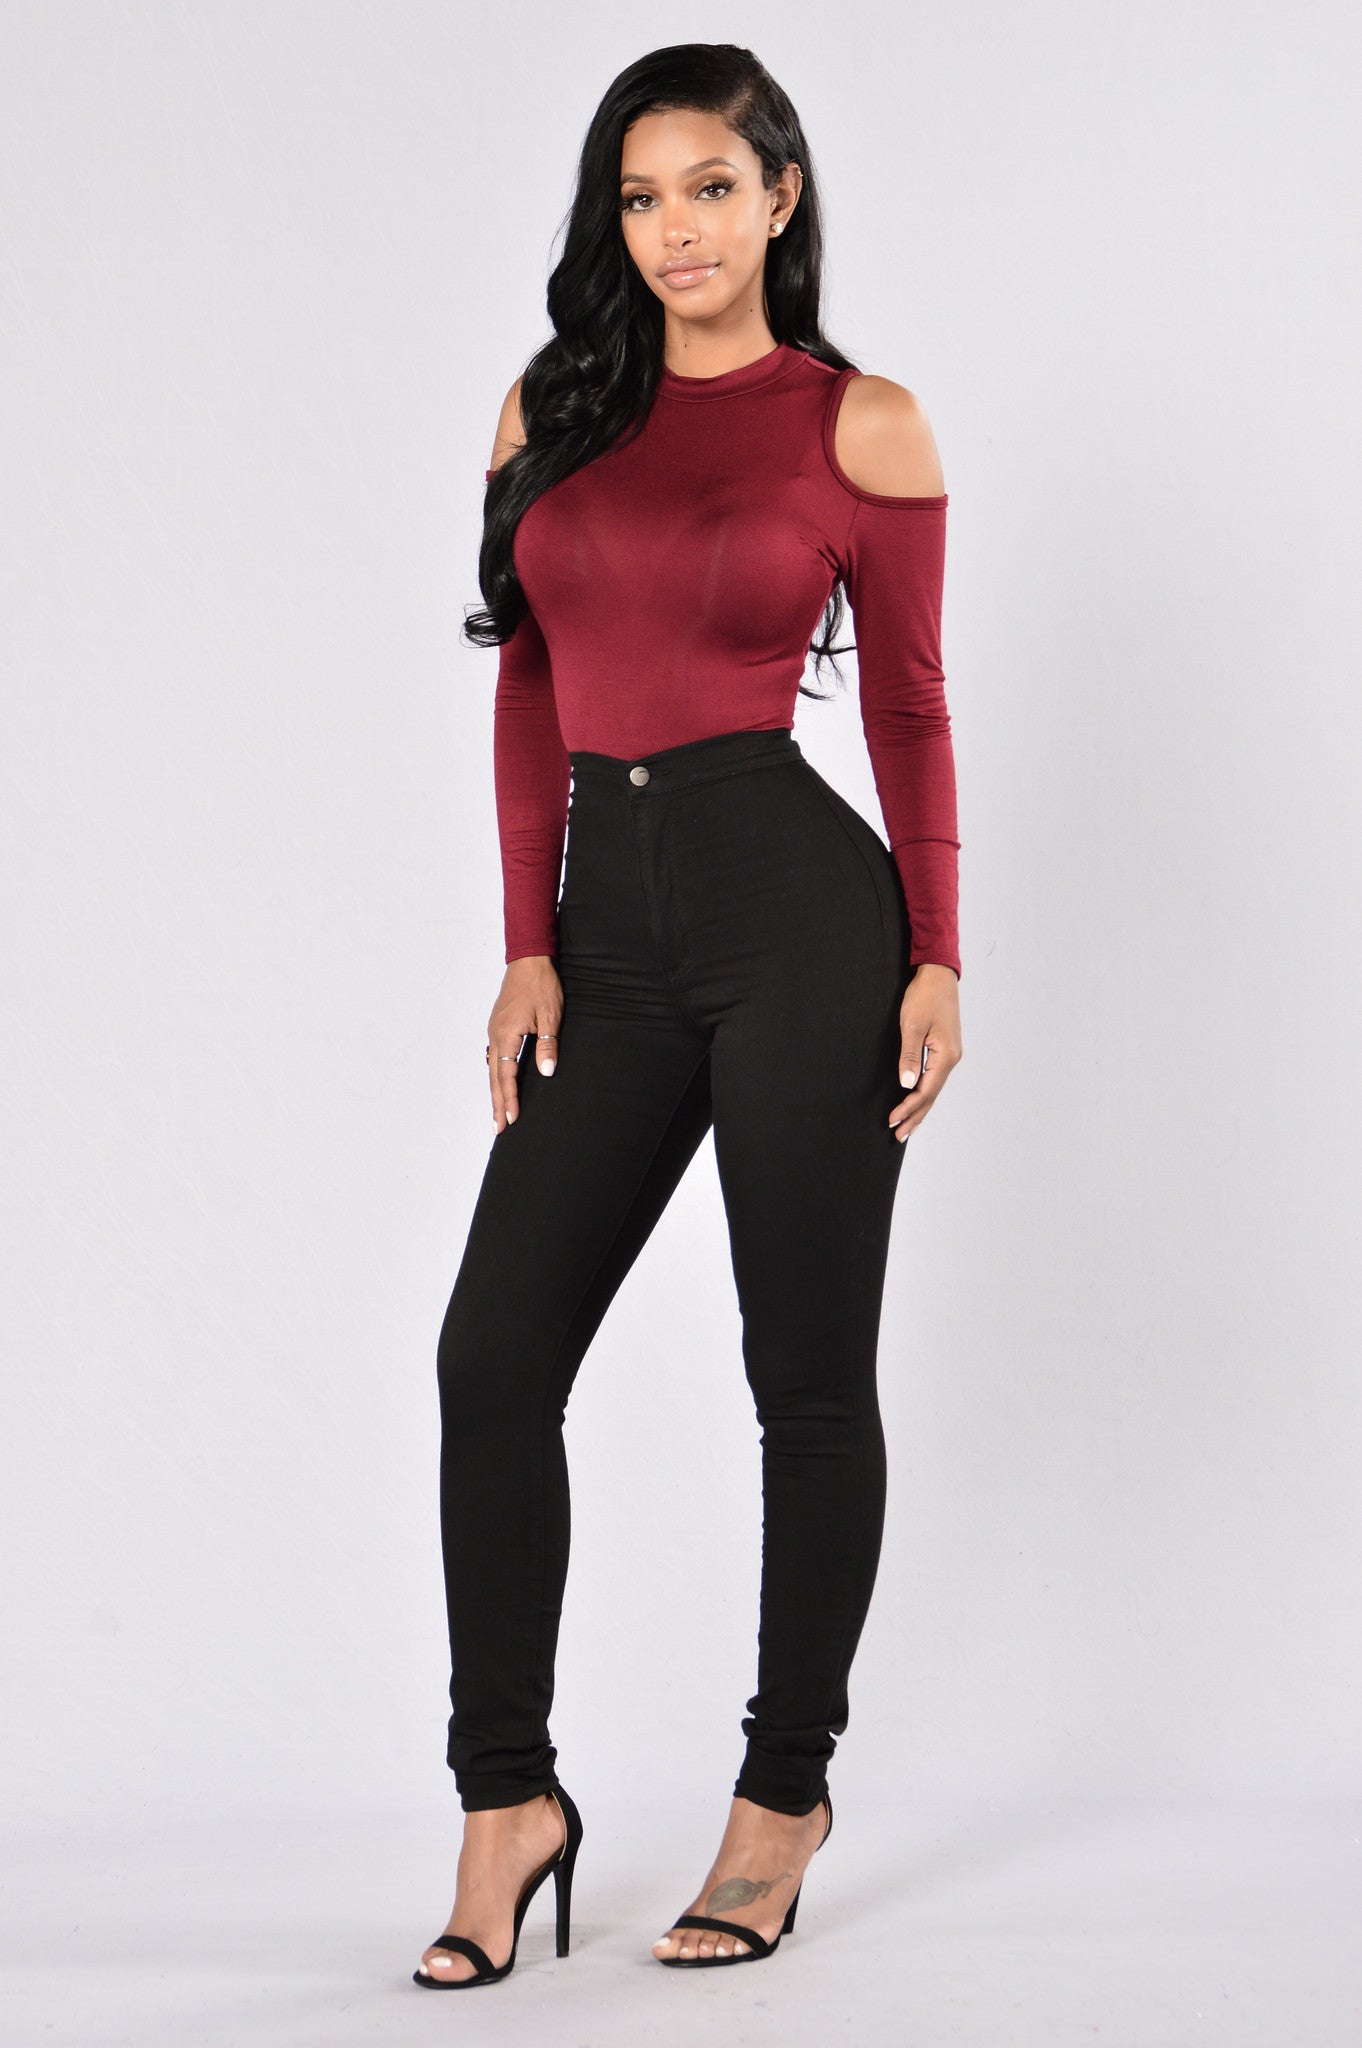 It's Cold Out Here Bodysuit - Burgundy